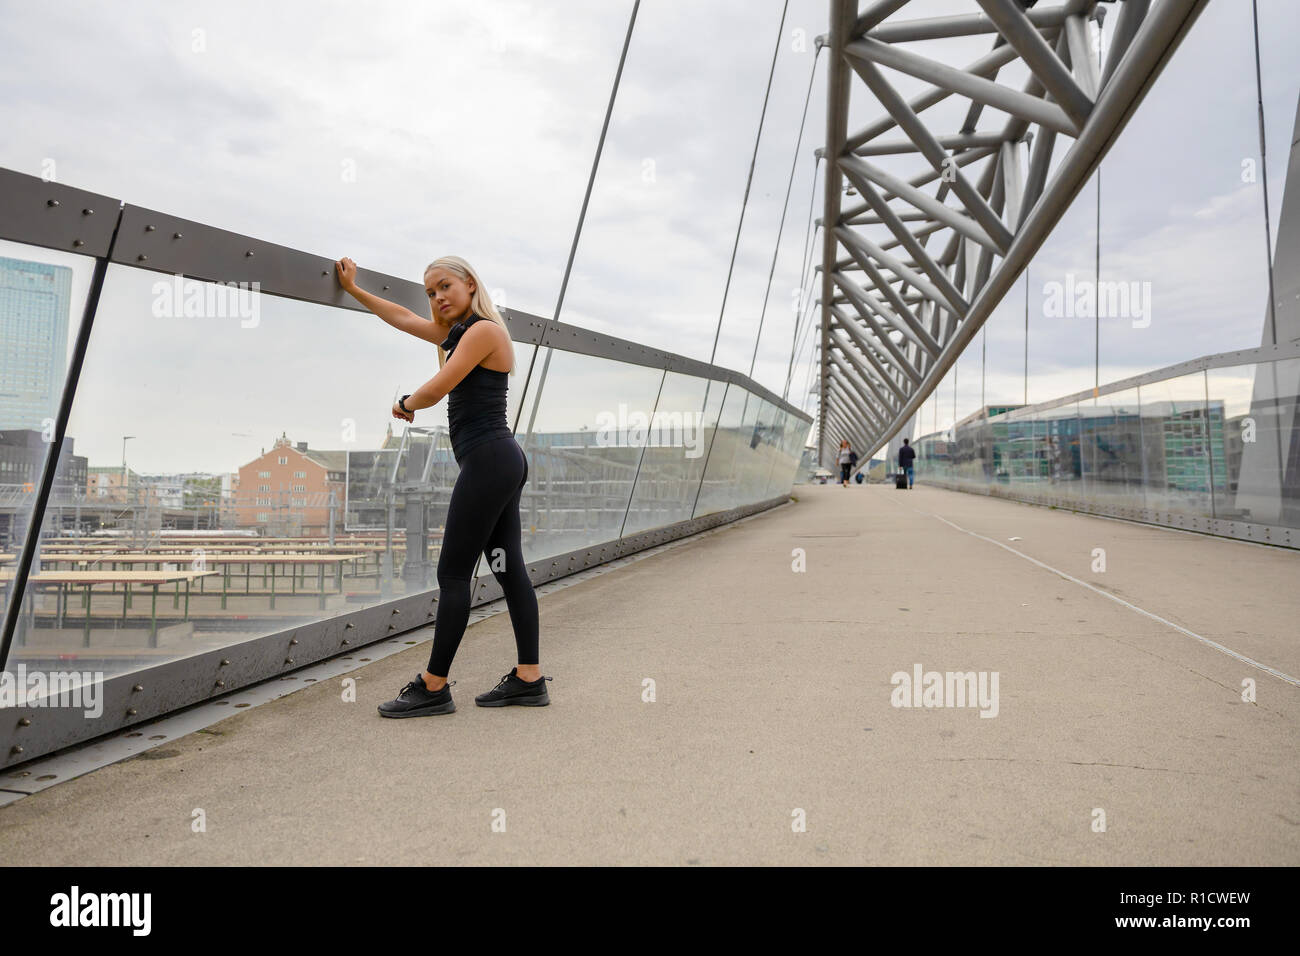 Woman Checking Heart Rate Using Smartwatch After Workout On Bridge Stock Photo